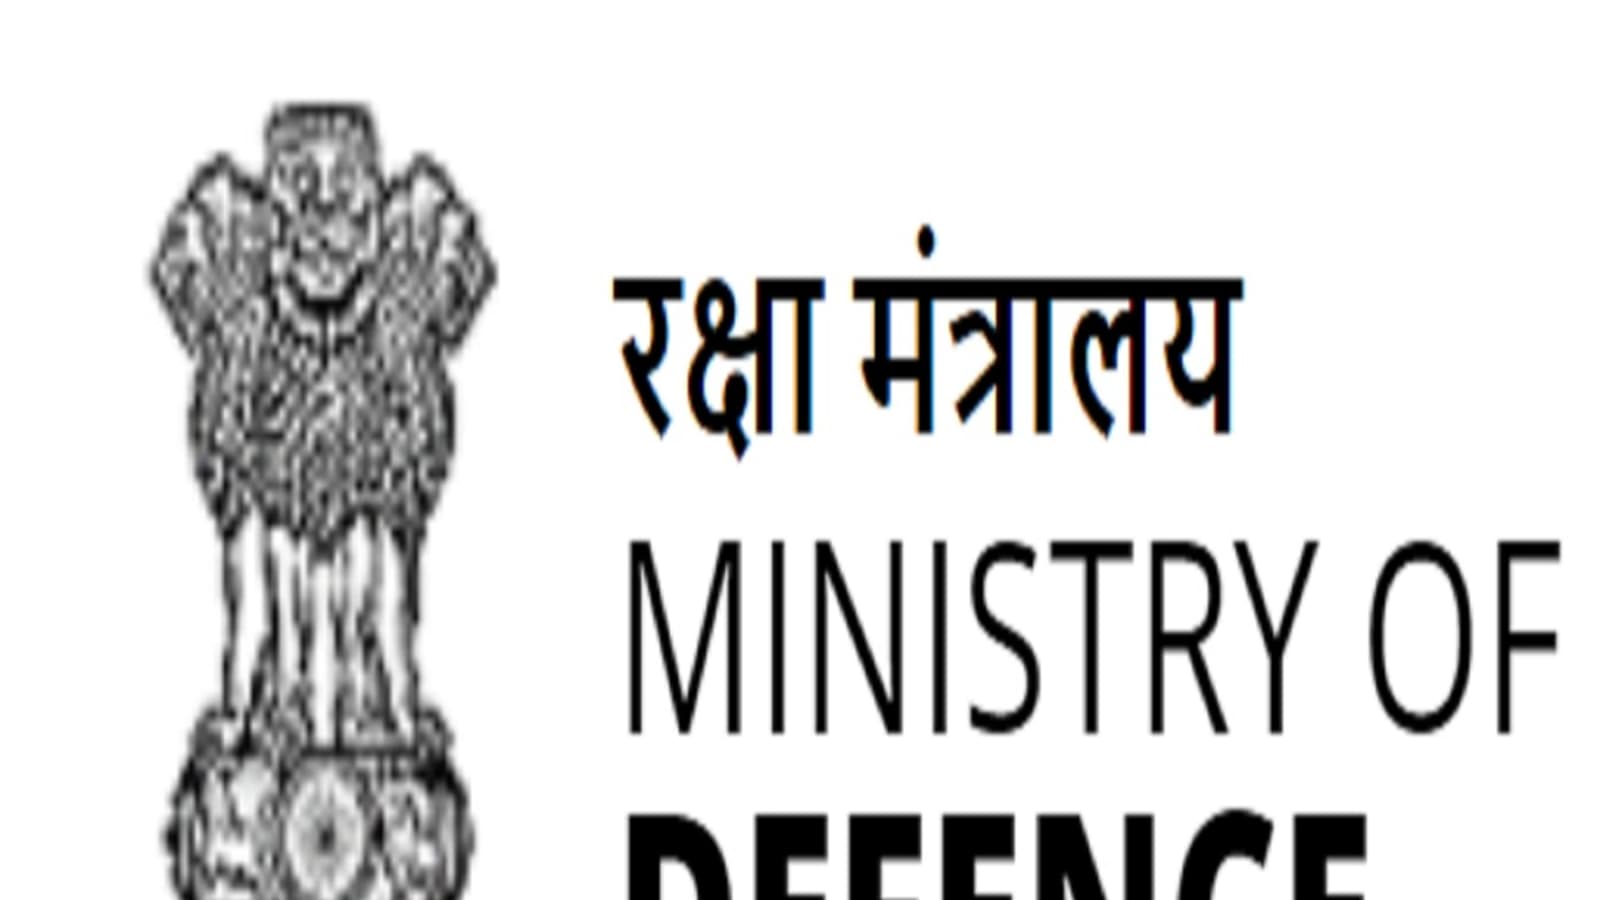 ministry of defence 1625901617667 1674891119435 1674891119435